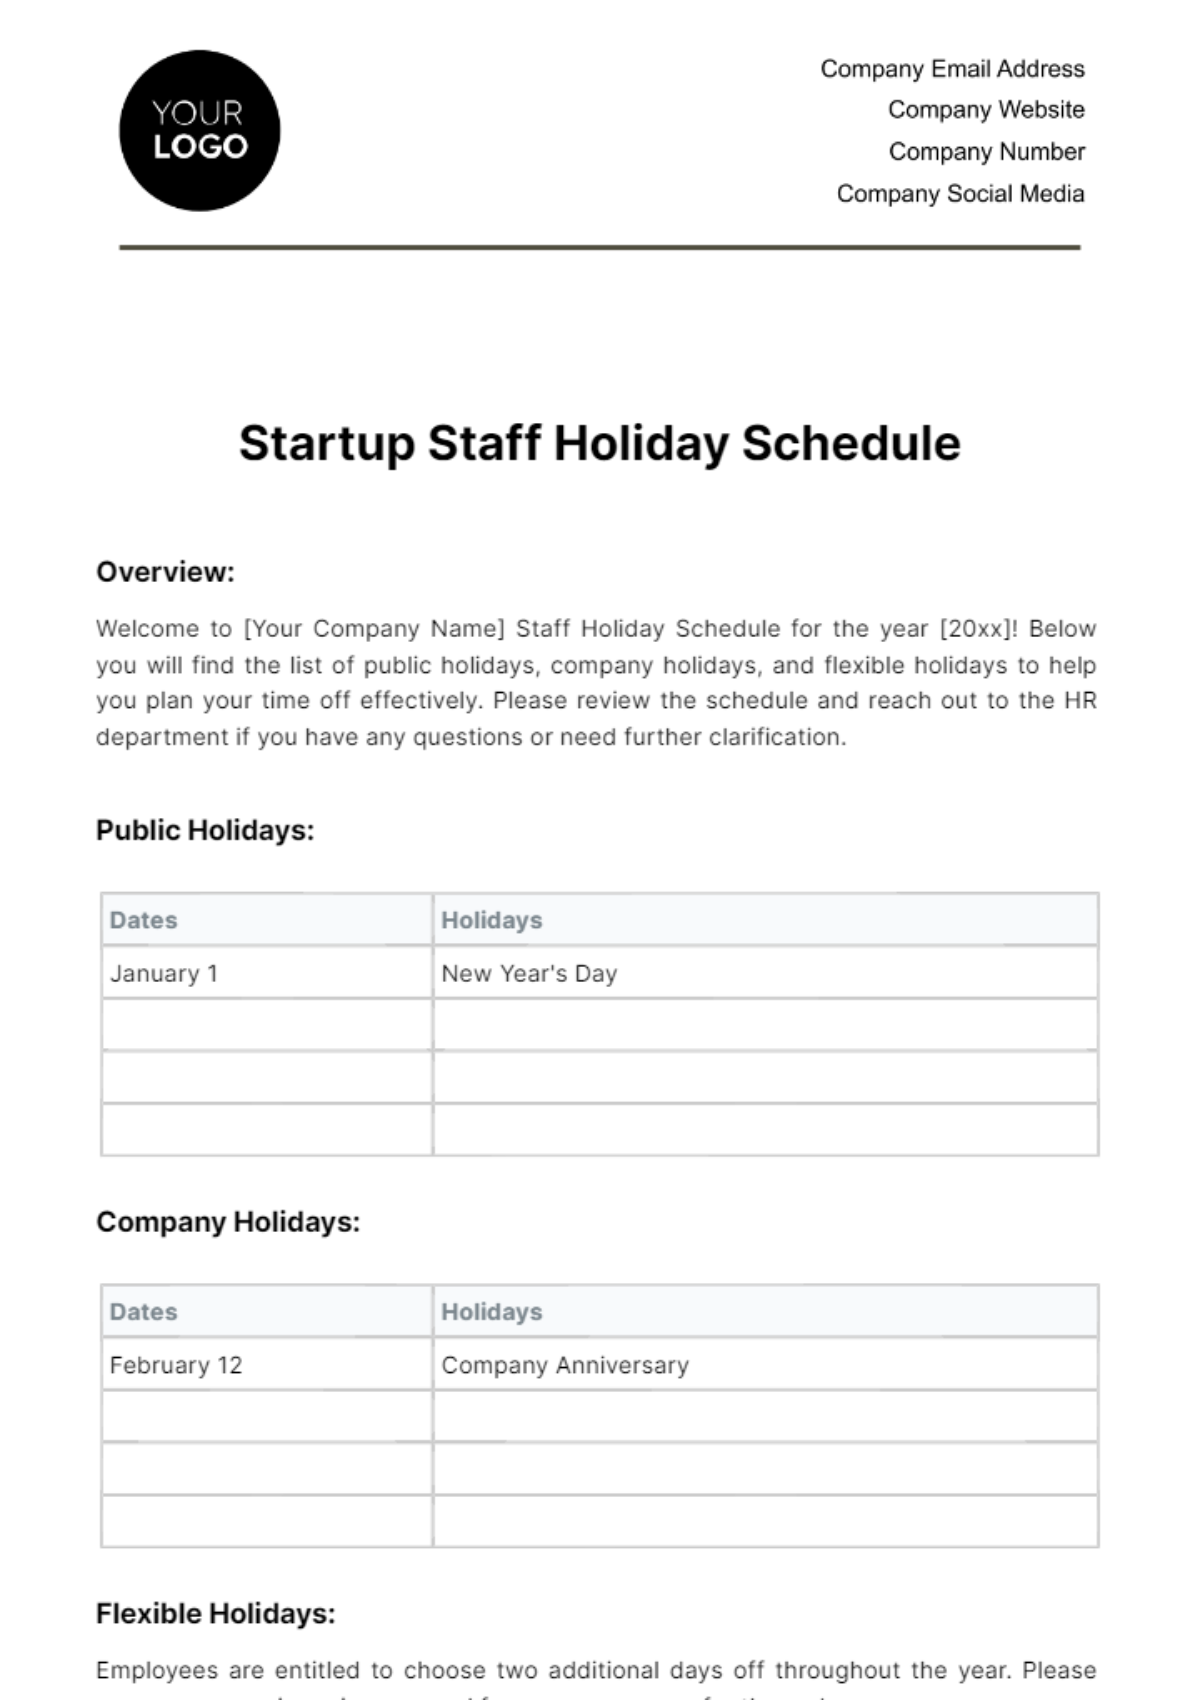 Free Startup Staff Holiday Schedule Template